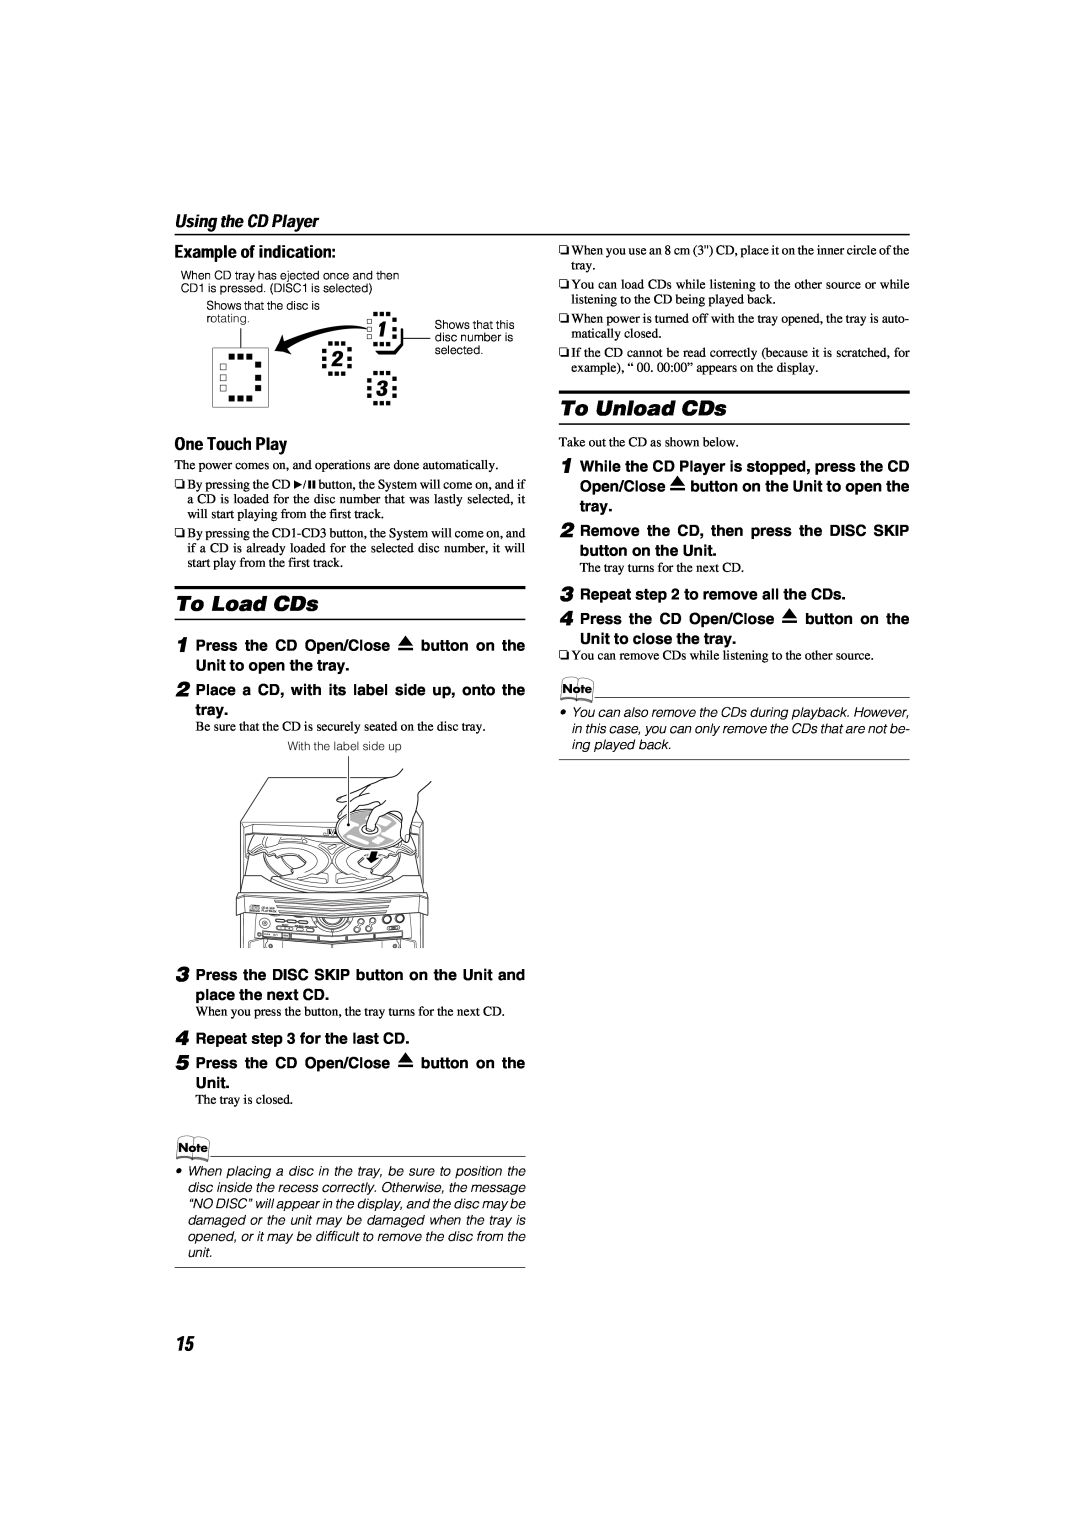 JVC LVT1014-003A, CA-MXKA6 manual To Load CDs, To Unload CDs, Using the CD Player, Example of indication, One Touch Play 